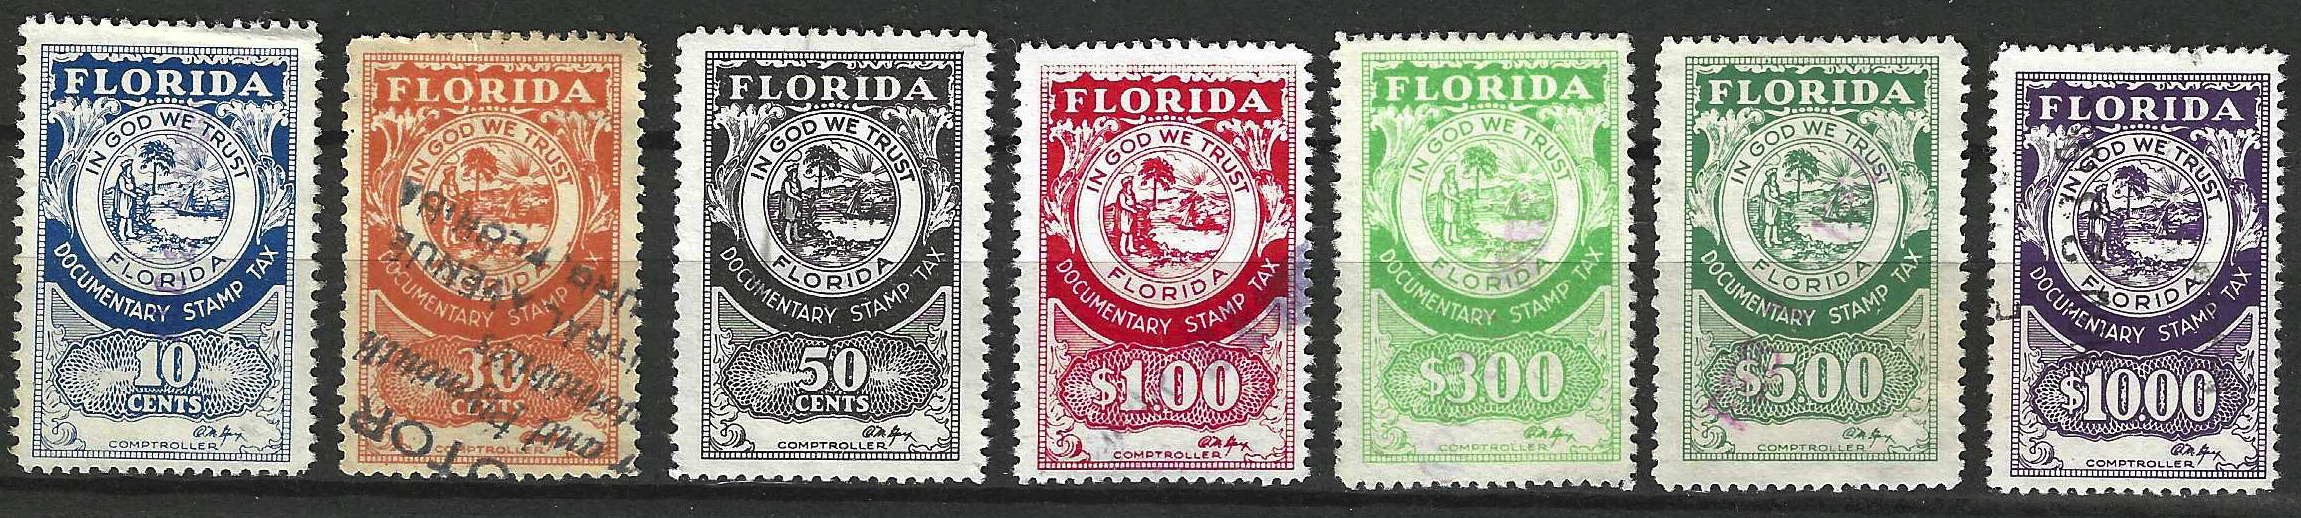 FL documentary Gay sig lot of 7 stamps D25-D31 10¢ - $10.00 U VF